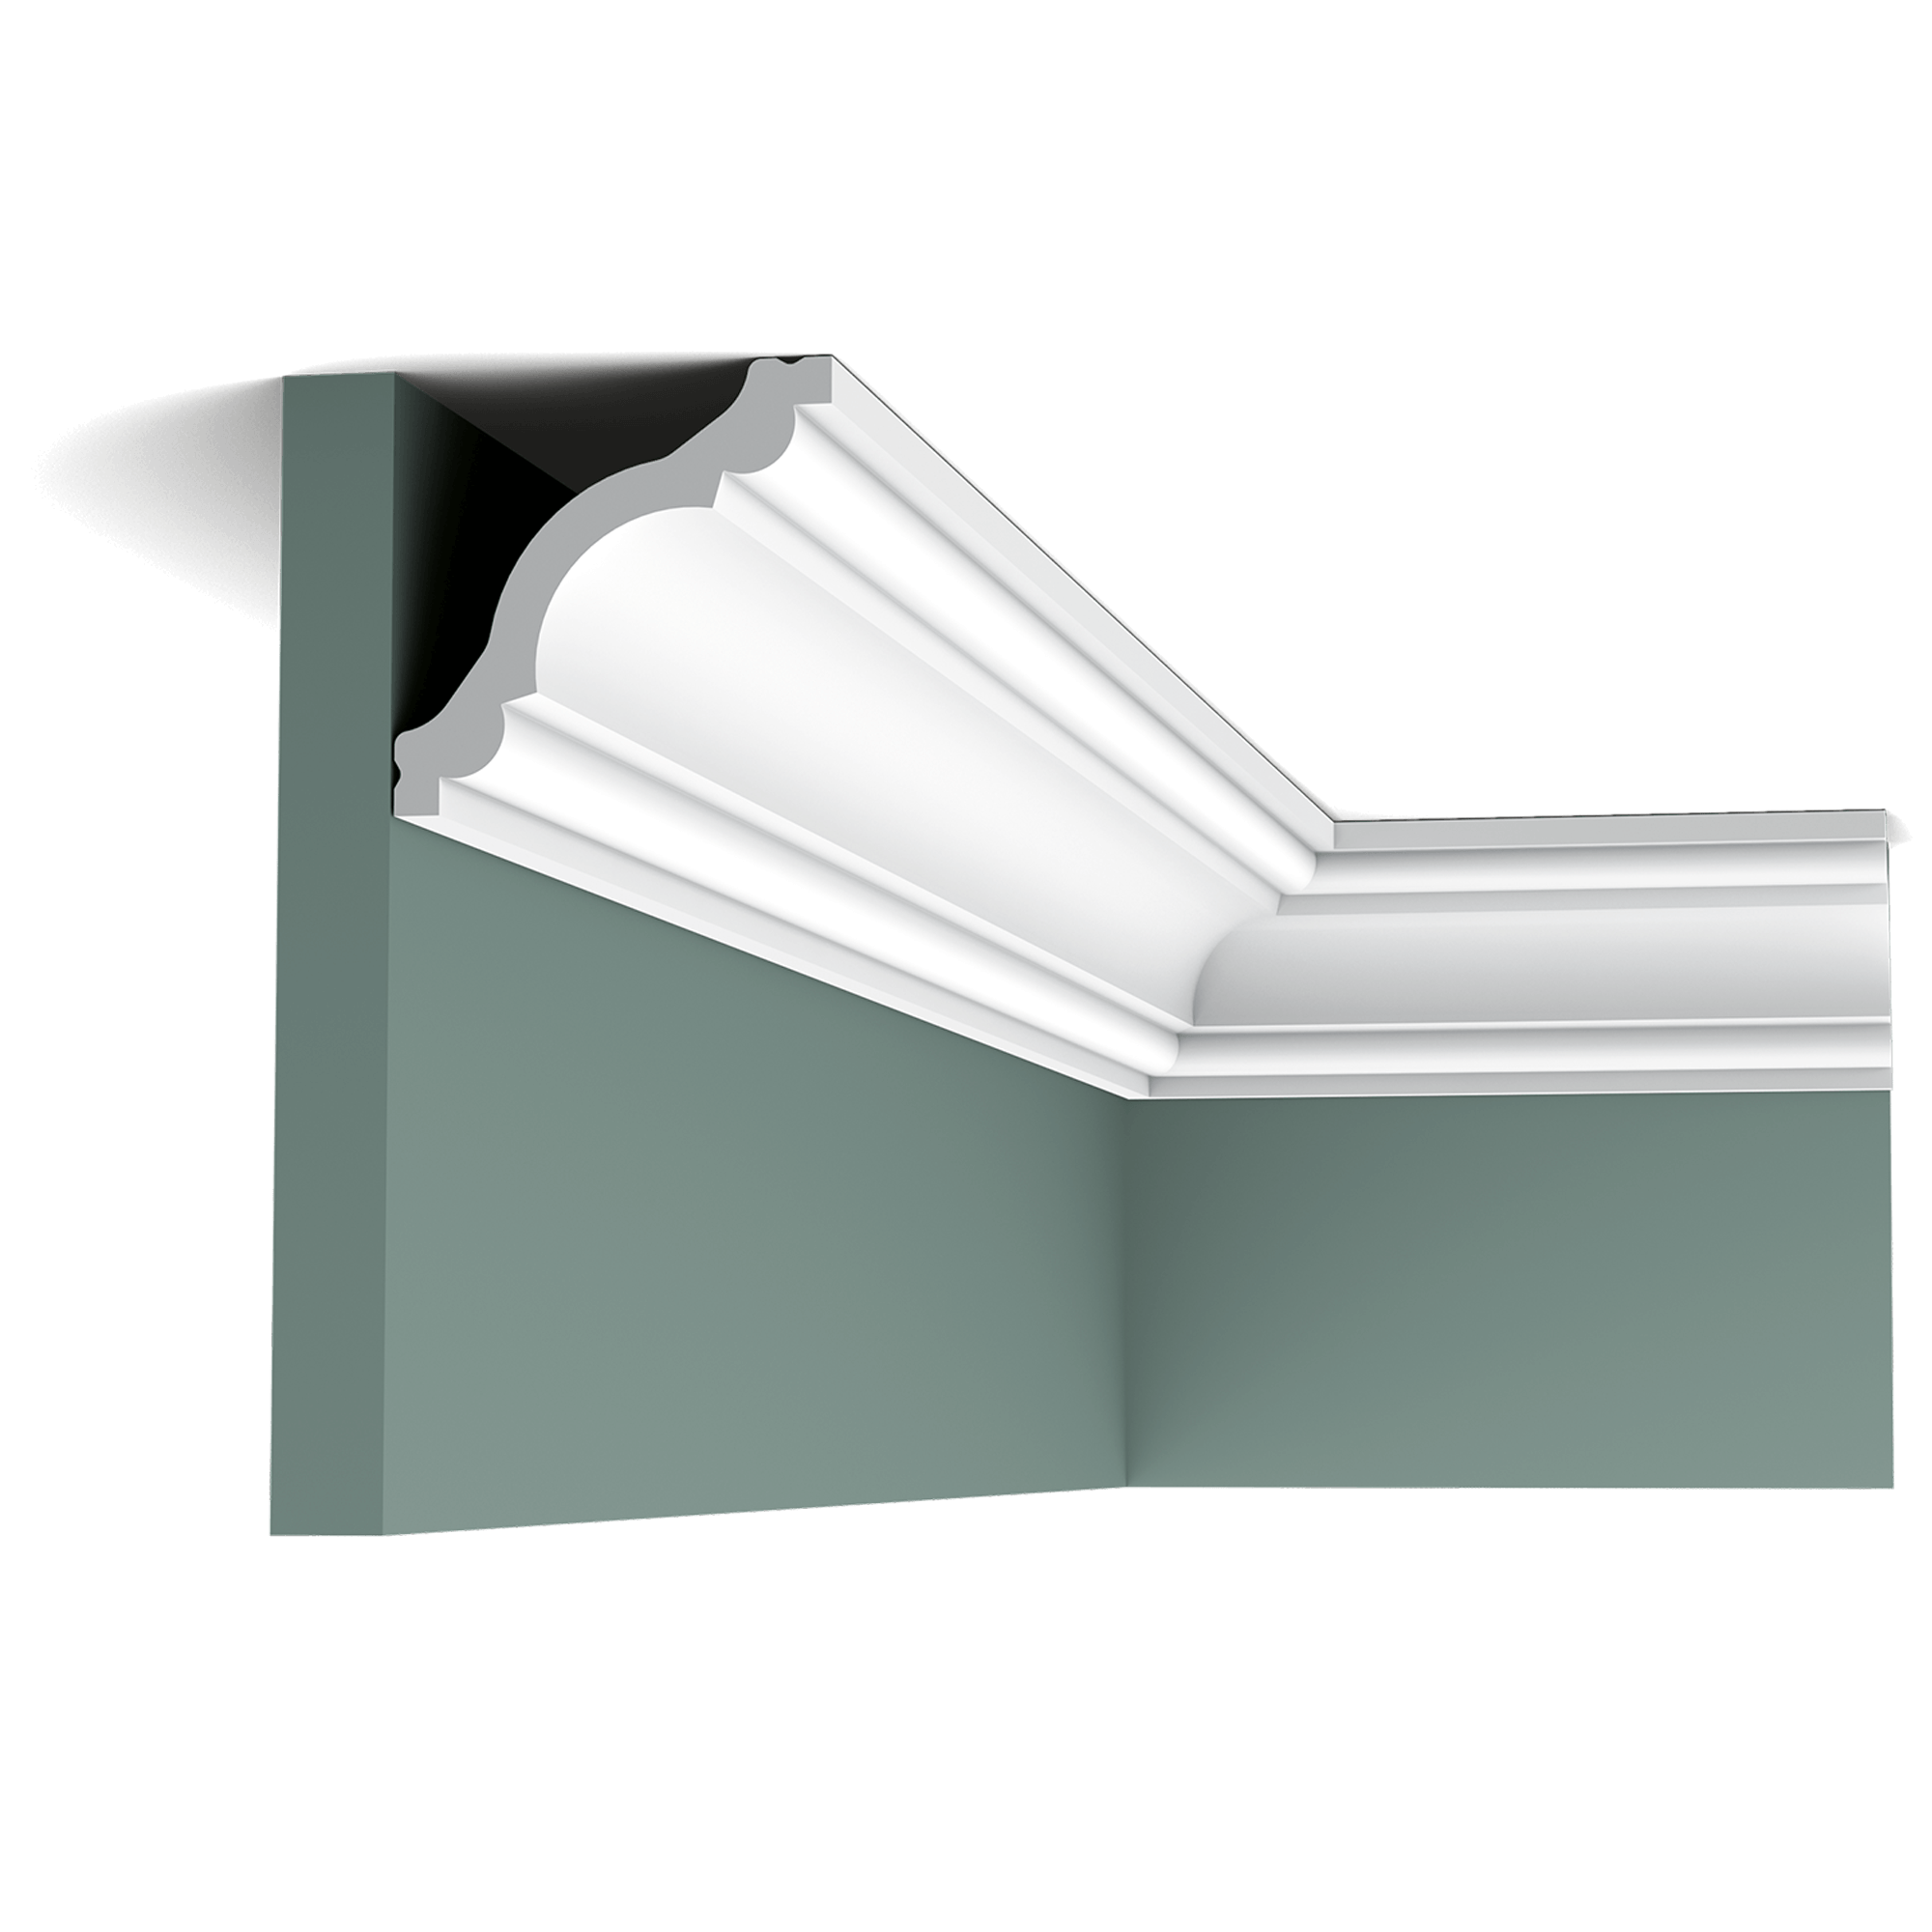 This classic cornice moulding with elegant curves creates a neat transition from wall to ceiling.